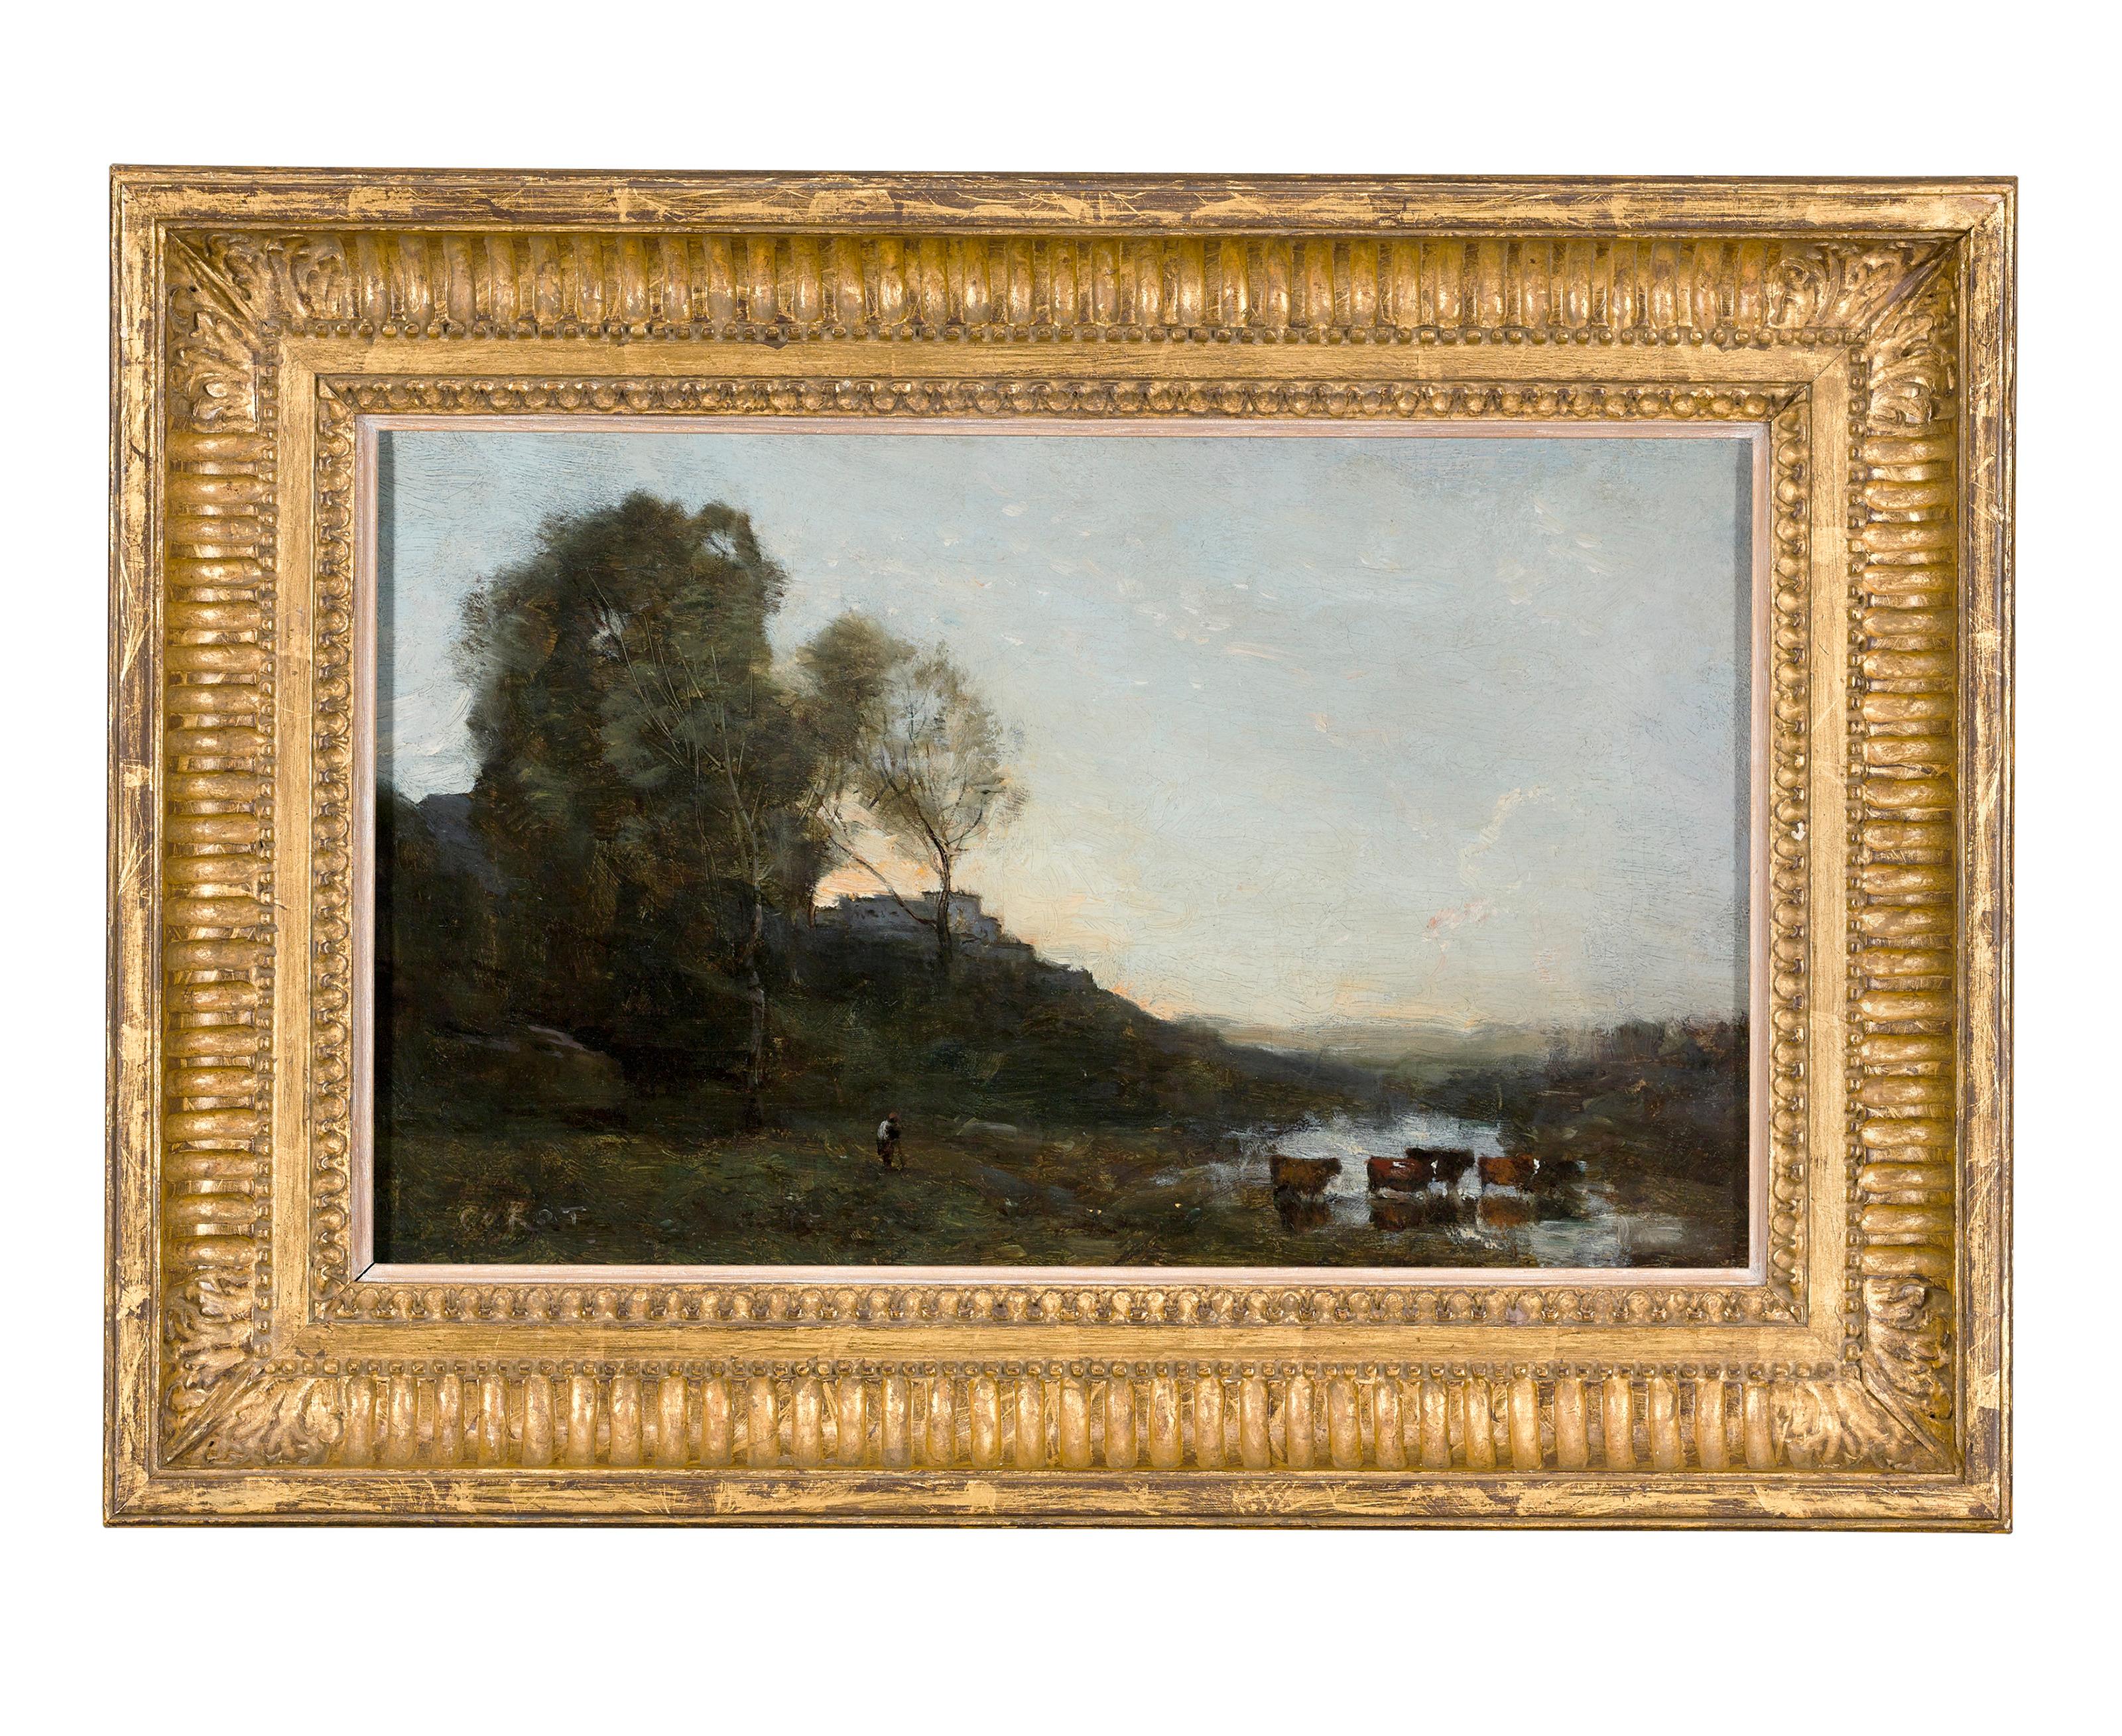 Le Gué aux Cinq Vaches (The Ford with Five Cows) - Painting by Jean-Baptiste-Camille Corot